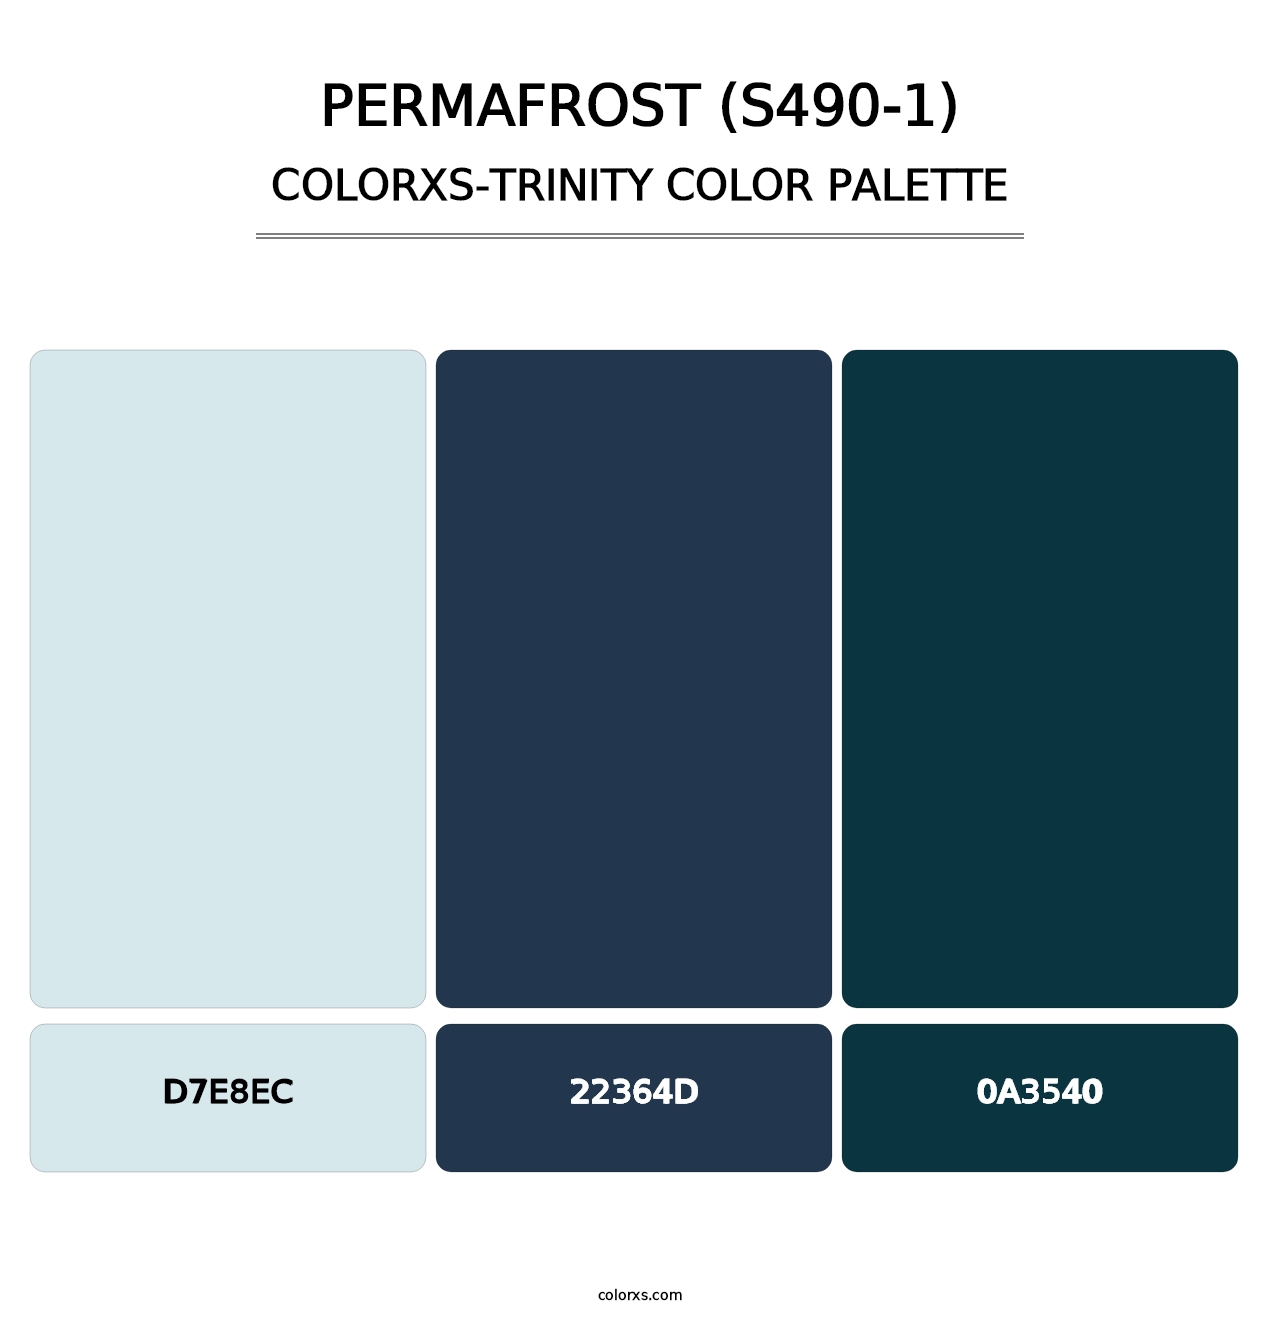 Permafrost (S490-1) - Colorxs Trinity Palette